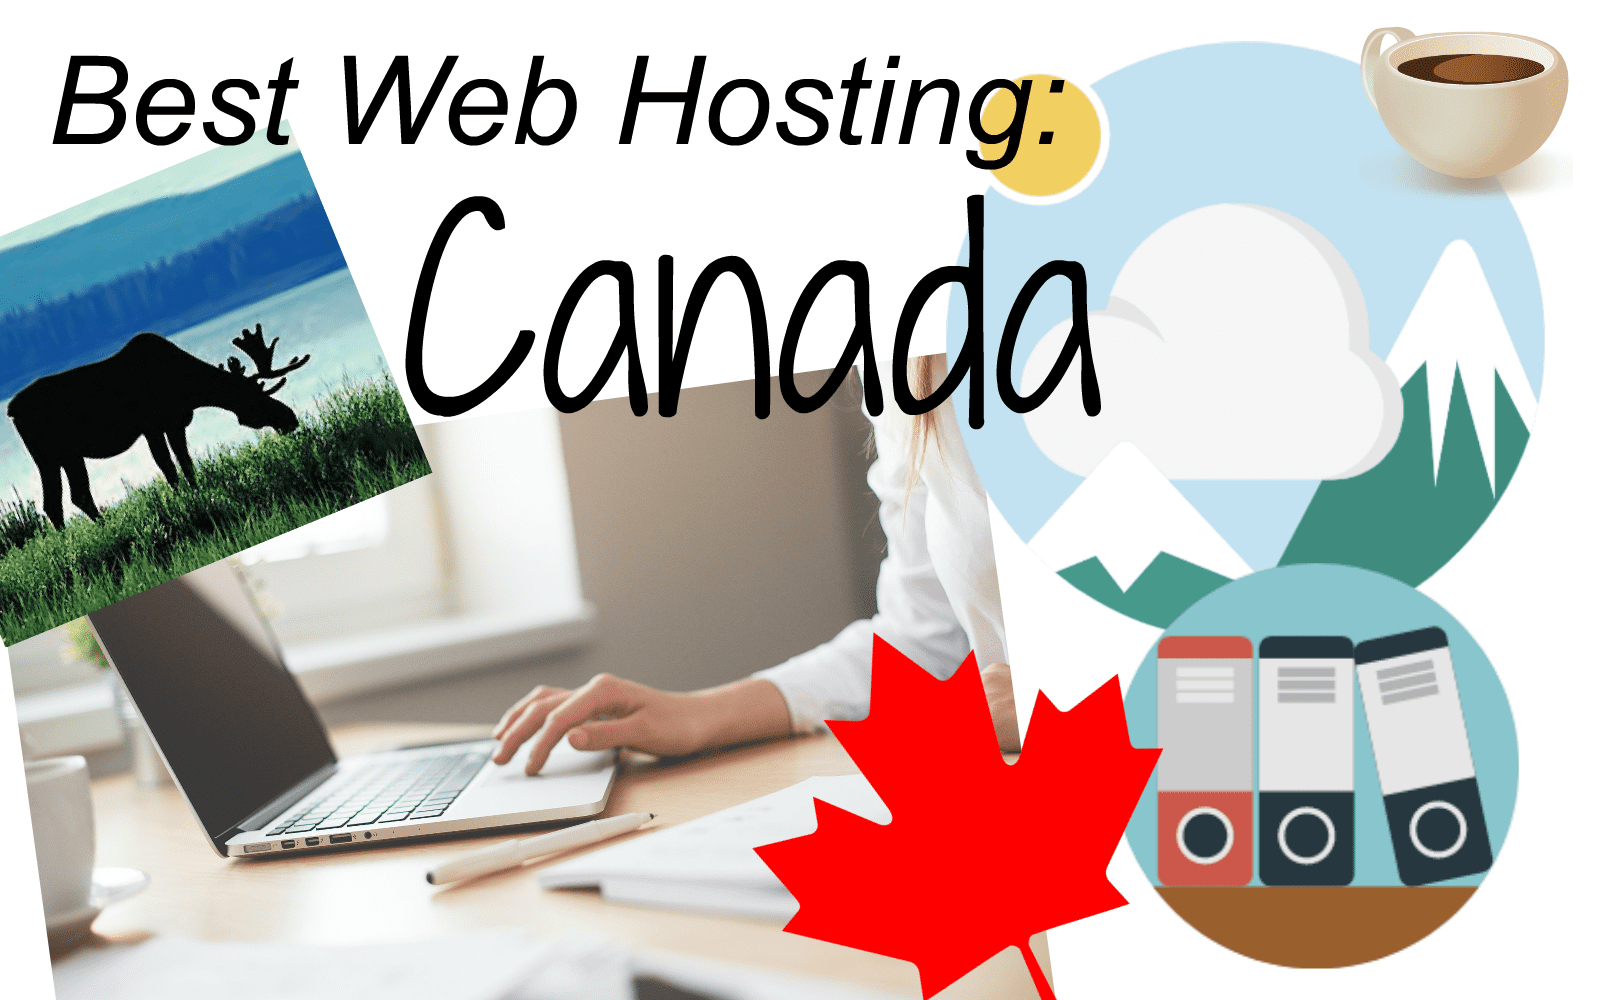 Best Web Hosting Canada 51 Off Our Top Host Reviews July 2019 Images, Photos, Reviews